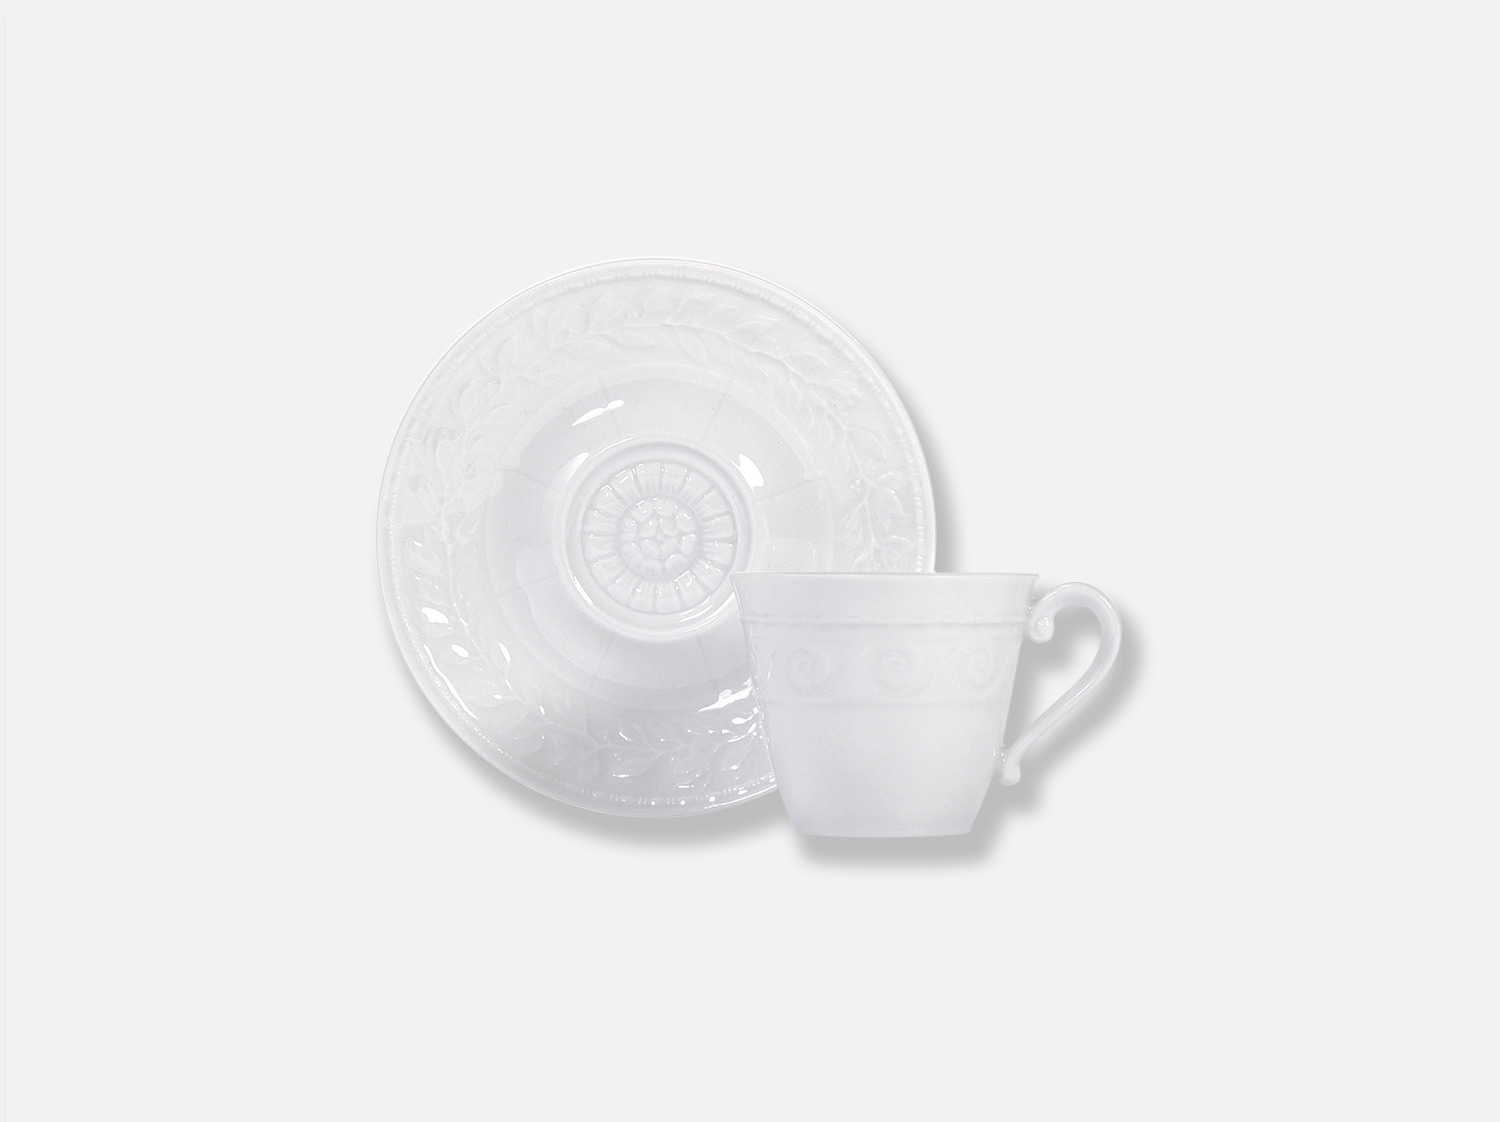 China Espresso cup and saucer extra 4.4 oz of the collection Louvre | Bernardaud